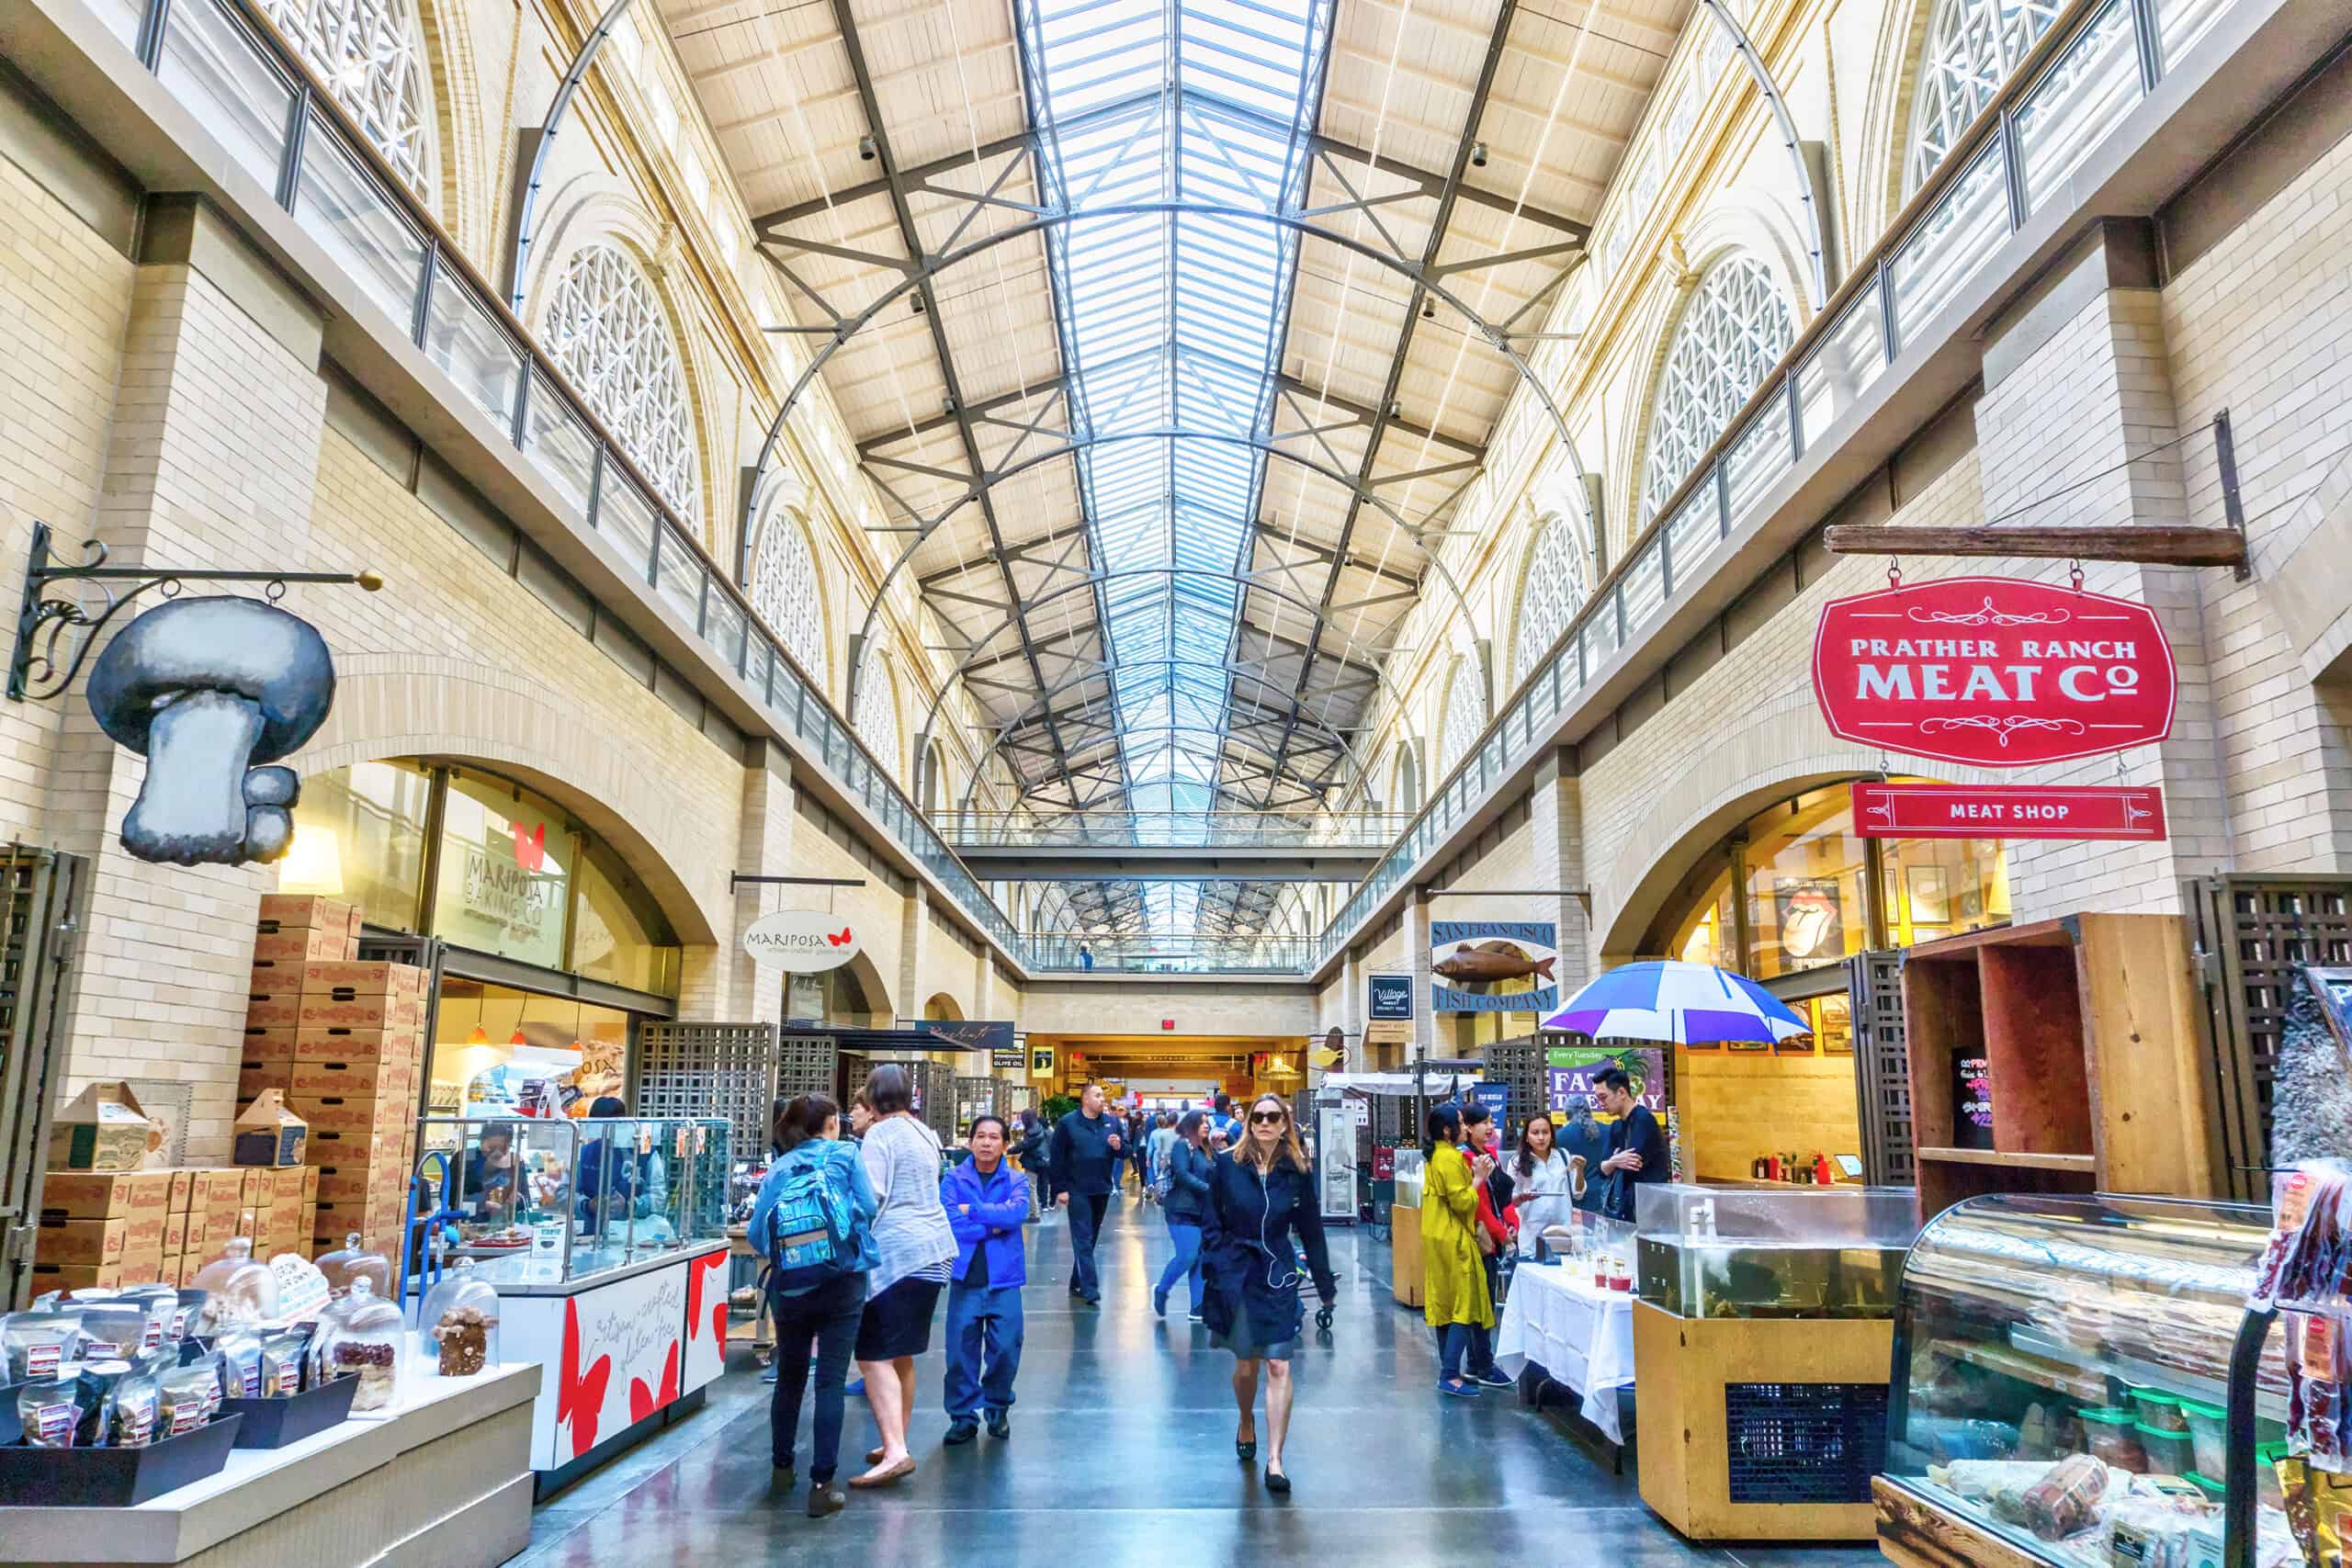 <p>Ferry Building Marketplace is a food lover’s haven located on the waterfront, featuring artisanal products, fresh produce, and gourmet food stalls. The market also offers stunning views of the Bay Bridge. Try the fresh oysters and artisan cheeses, and visit in the morning or early afternoon for the best experience. Itâs located at the Embarcadero, accessible by BART, Muni, or ferry.</p><p>This article originally appeared on <a href="https://rarest.org/?p=32632&preview=true">Rarest.org</a>.</p>